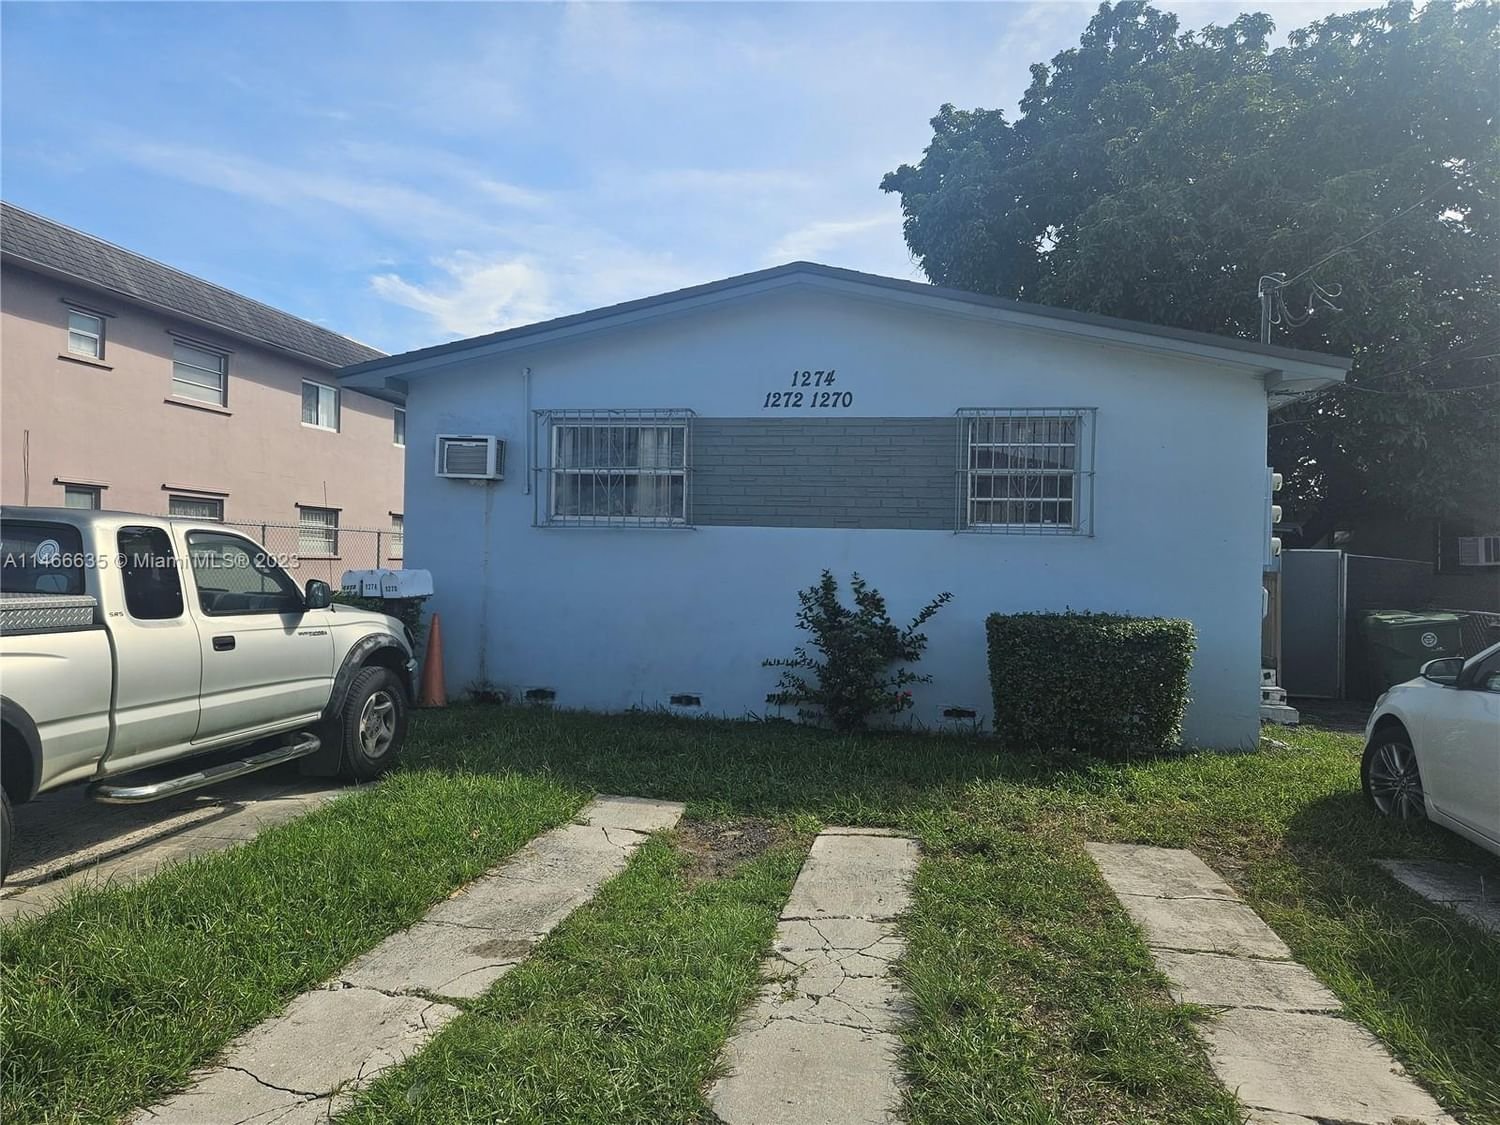 Real estate property located at 1270 26th Pl, Miami-Dade County, FLA FRUIT LAND CO SUB, Hialeah, FL